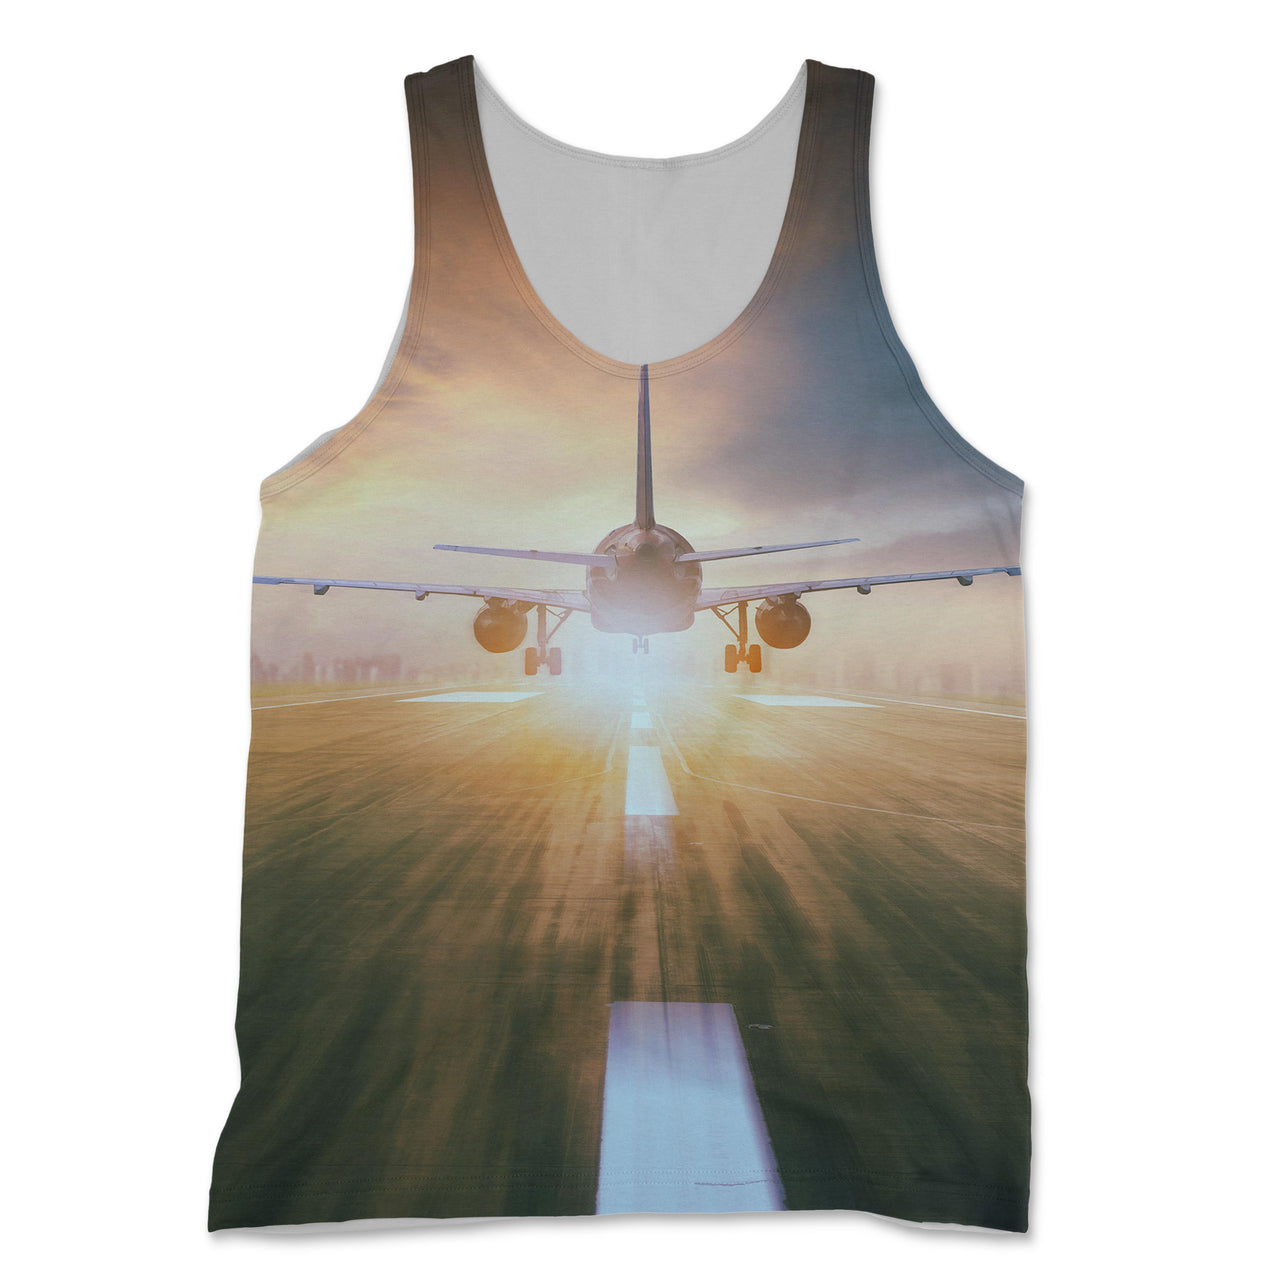 Airplane Flying Over Runway Designed 3D Tank Tops